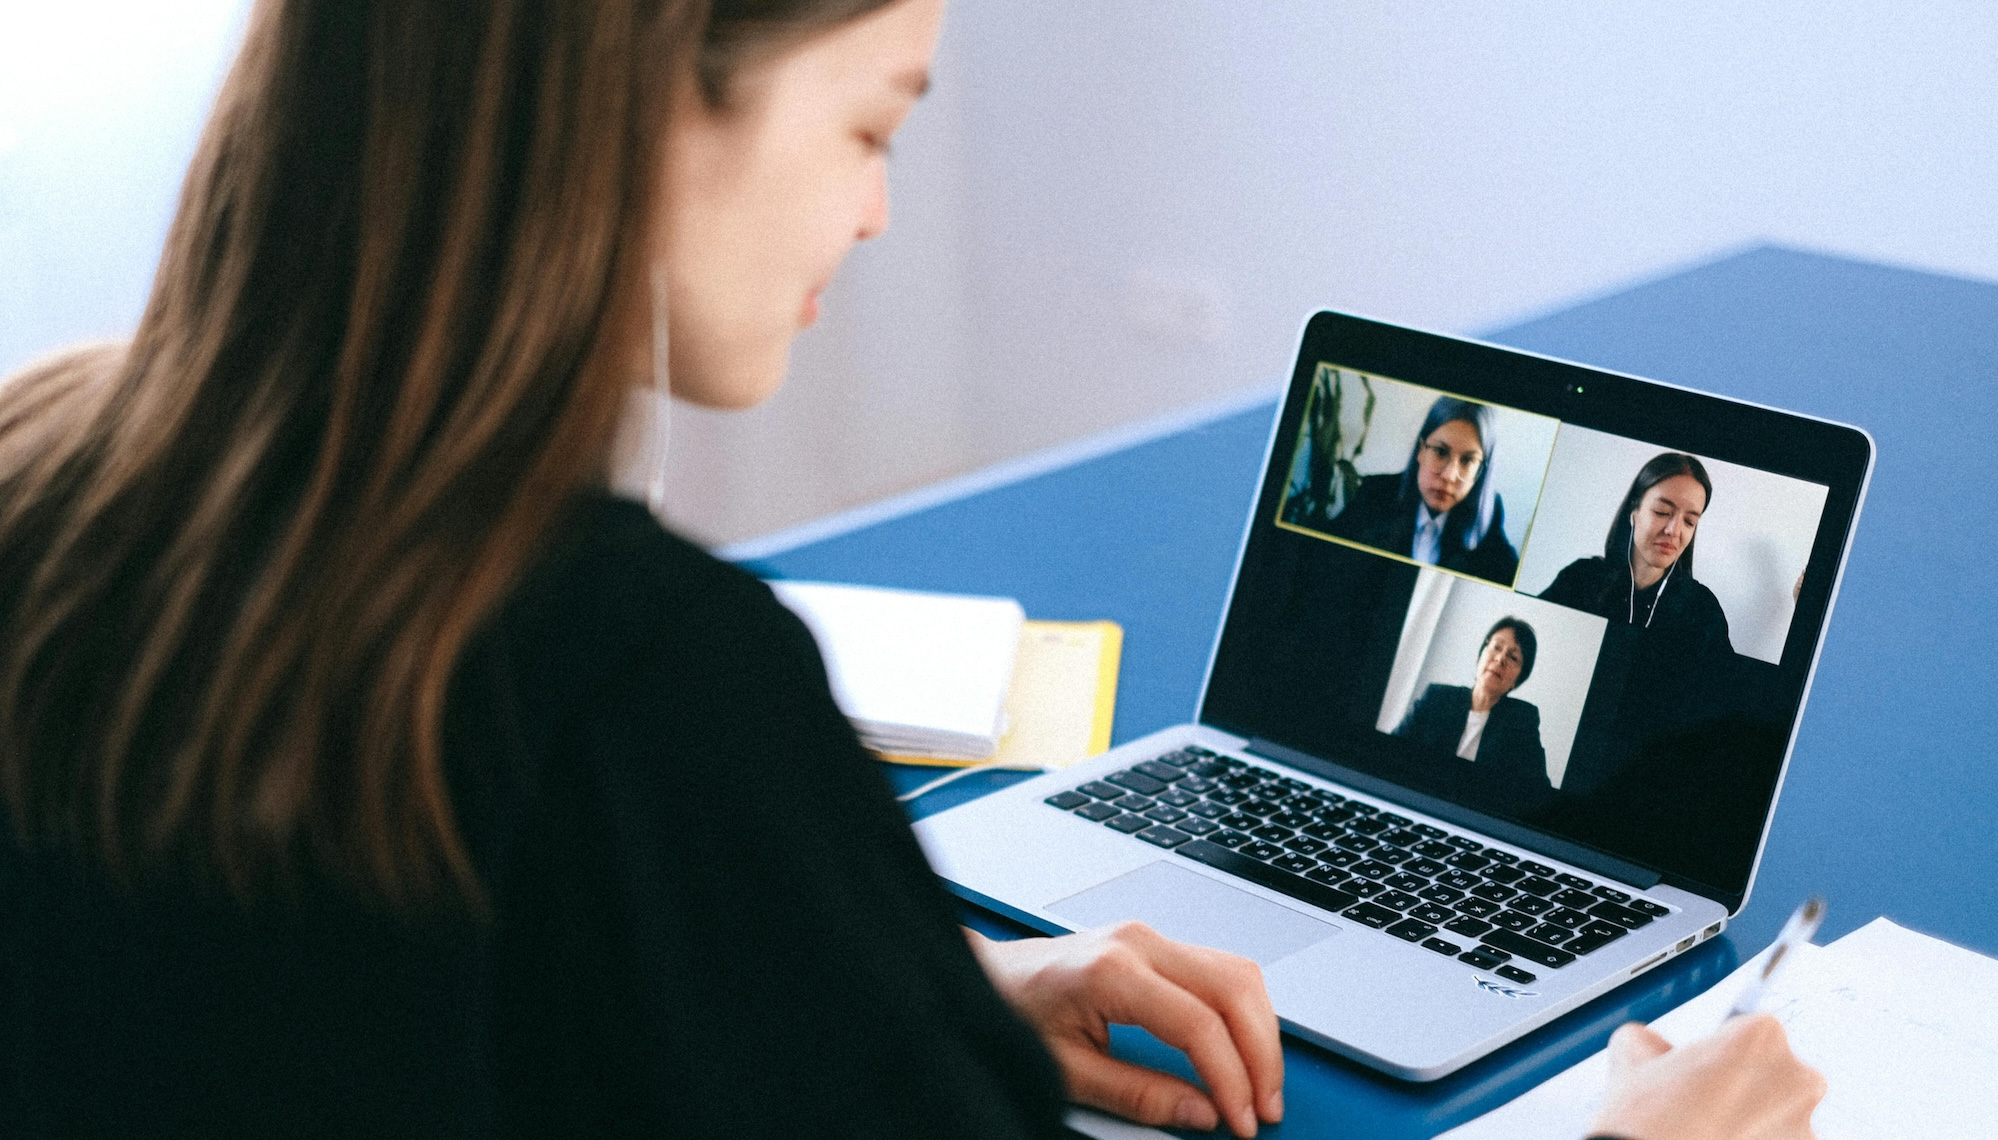 Remote worker speaks with international remote employees over a video conference call.